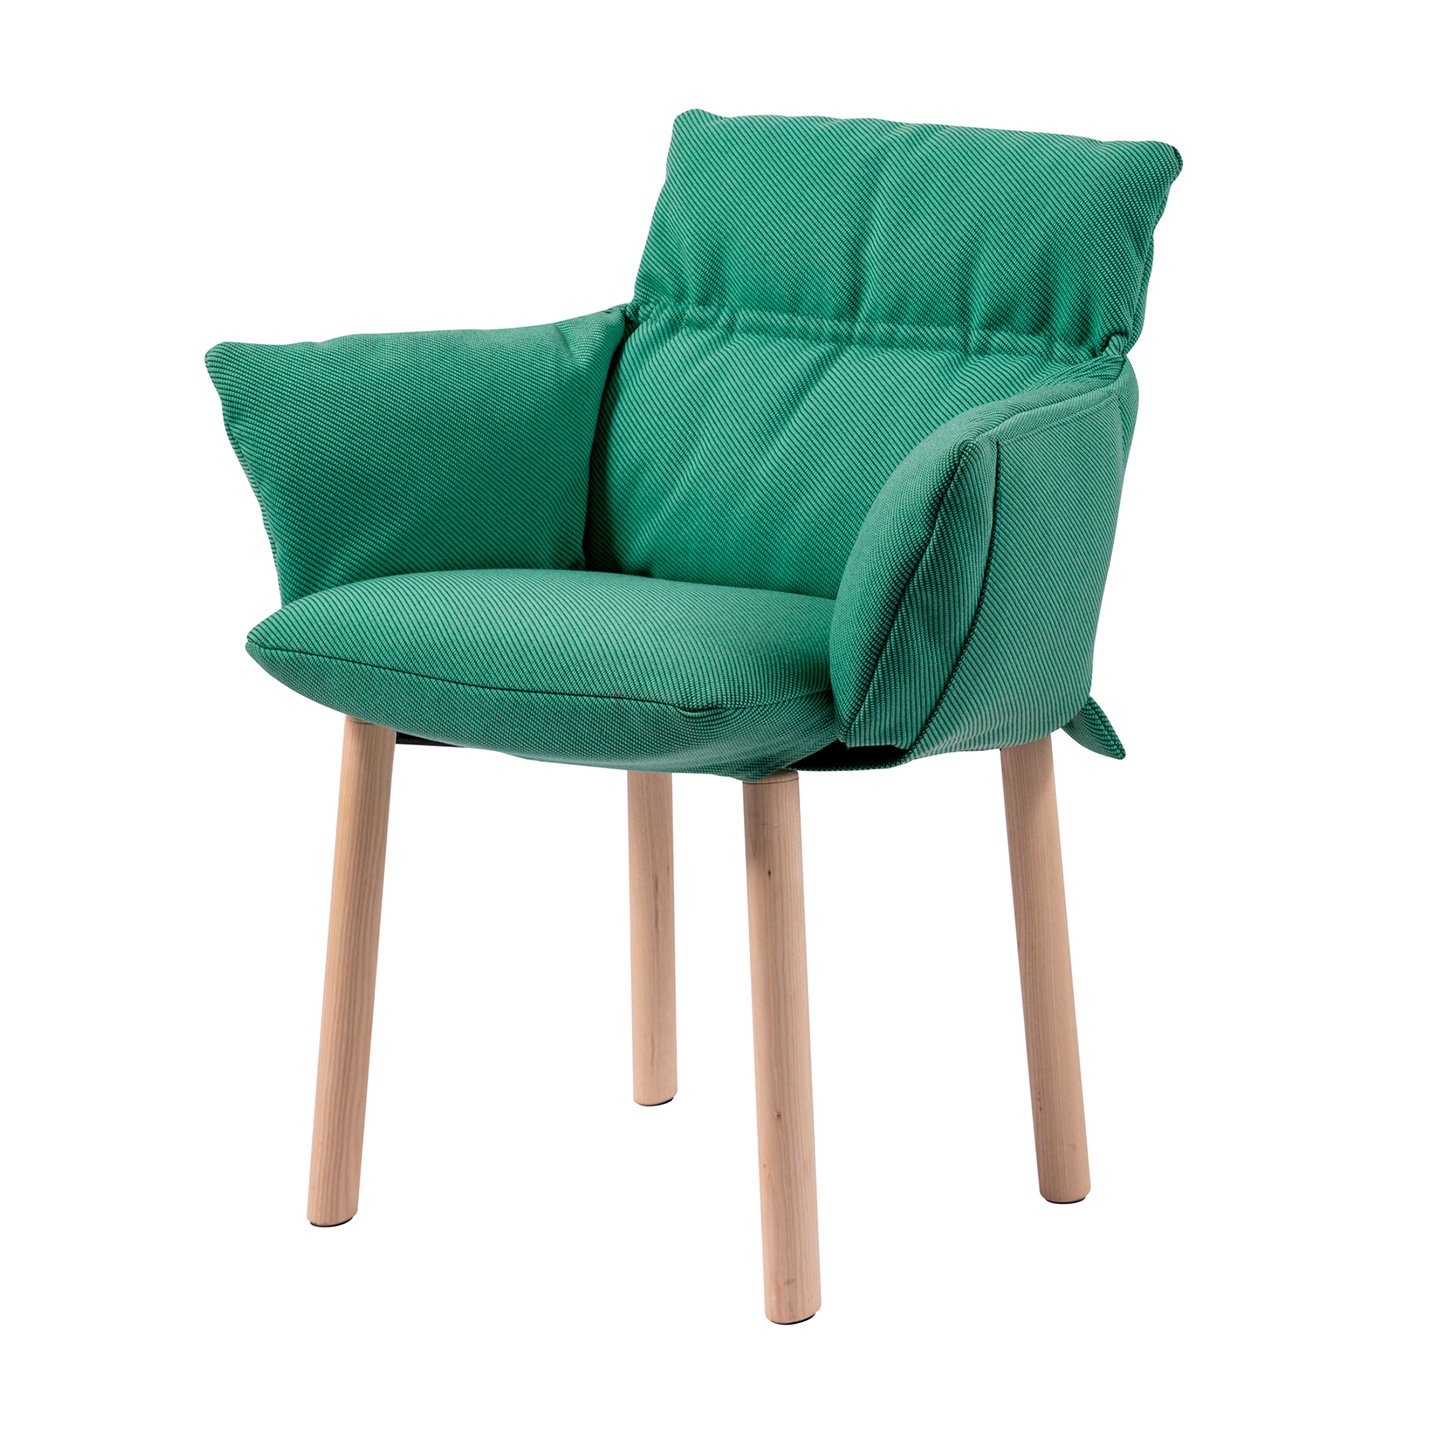 Lud'ina is a chair designed for the office, the home office or even the dining room.